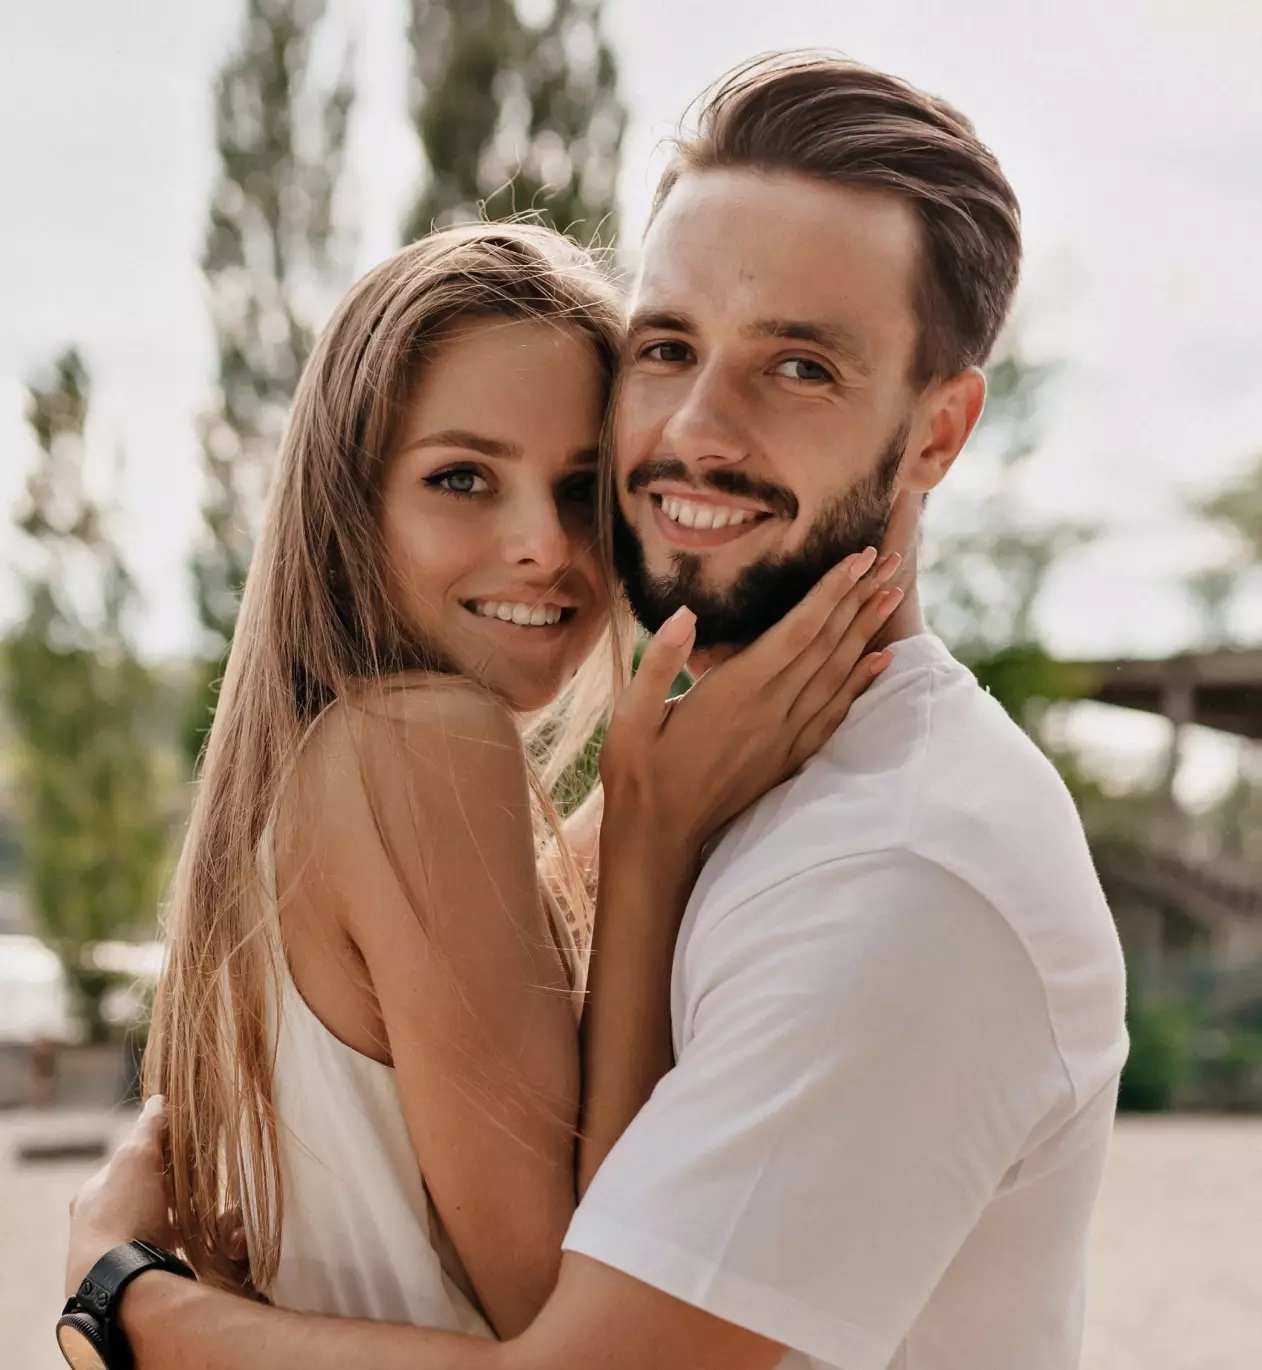 Couple people smiling while hugging